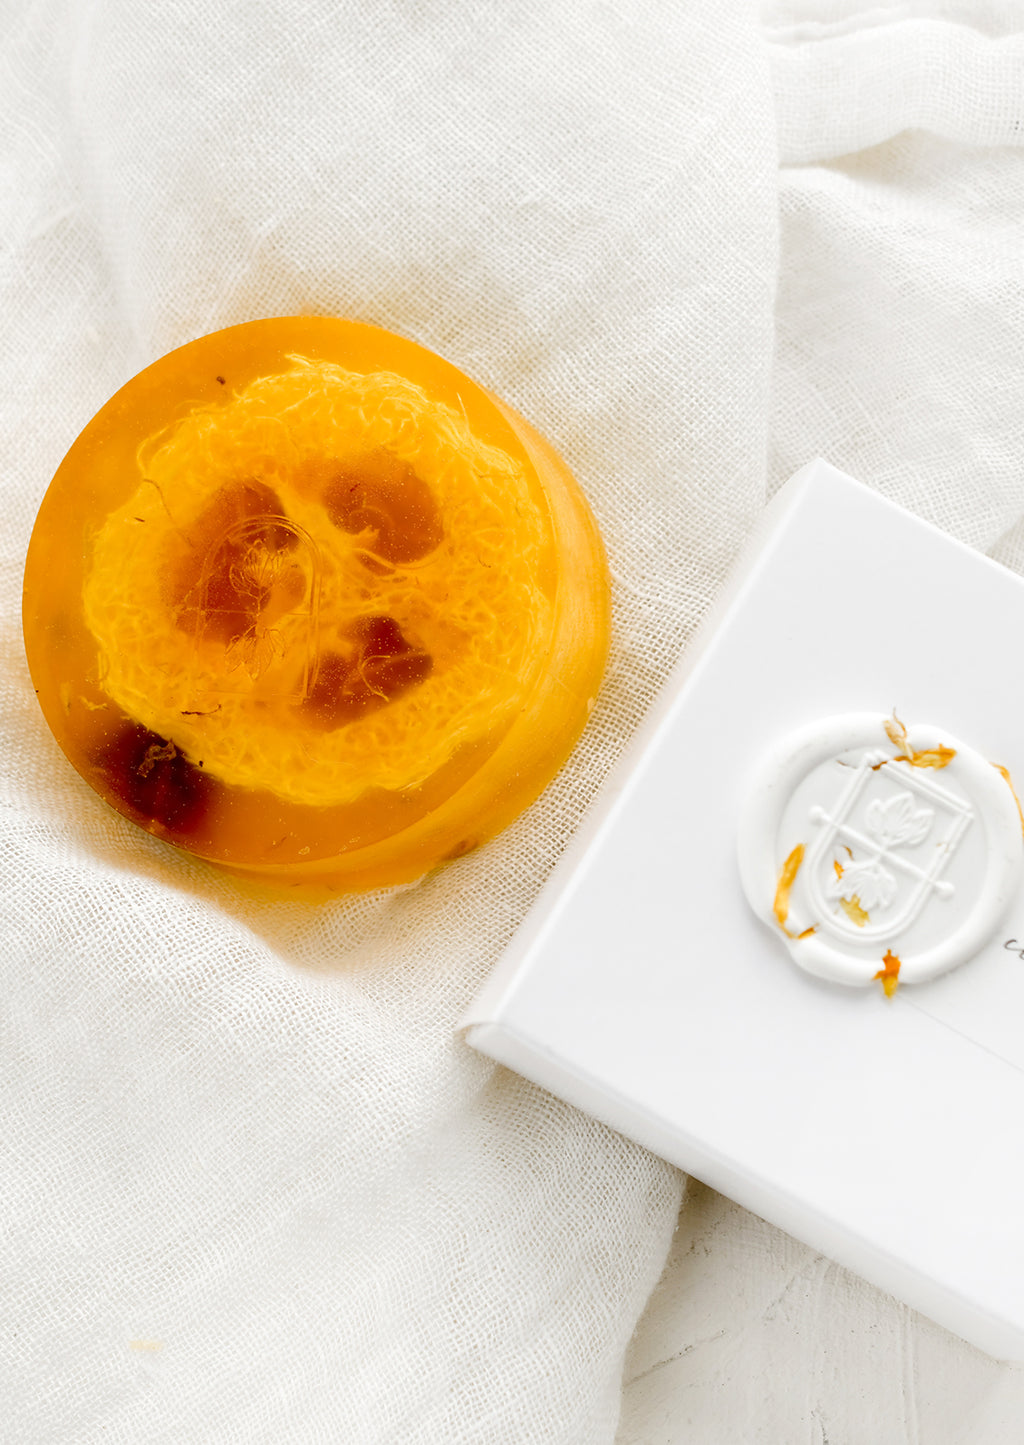 Citrus + Mint: A round translucent orange bar soap with wax seal packaging.